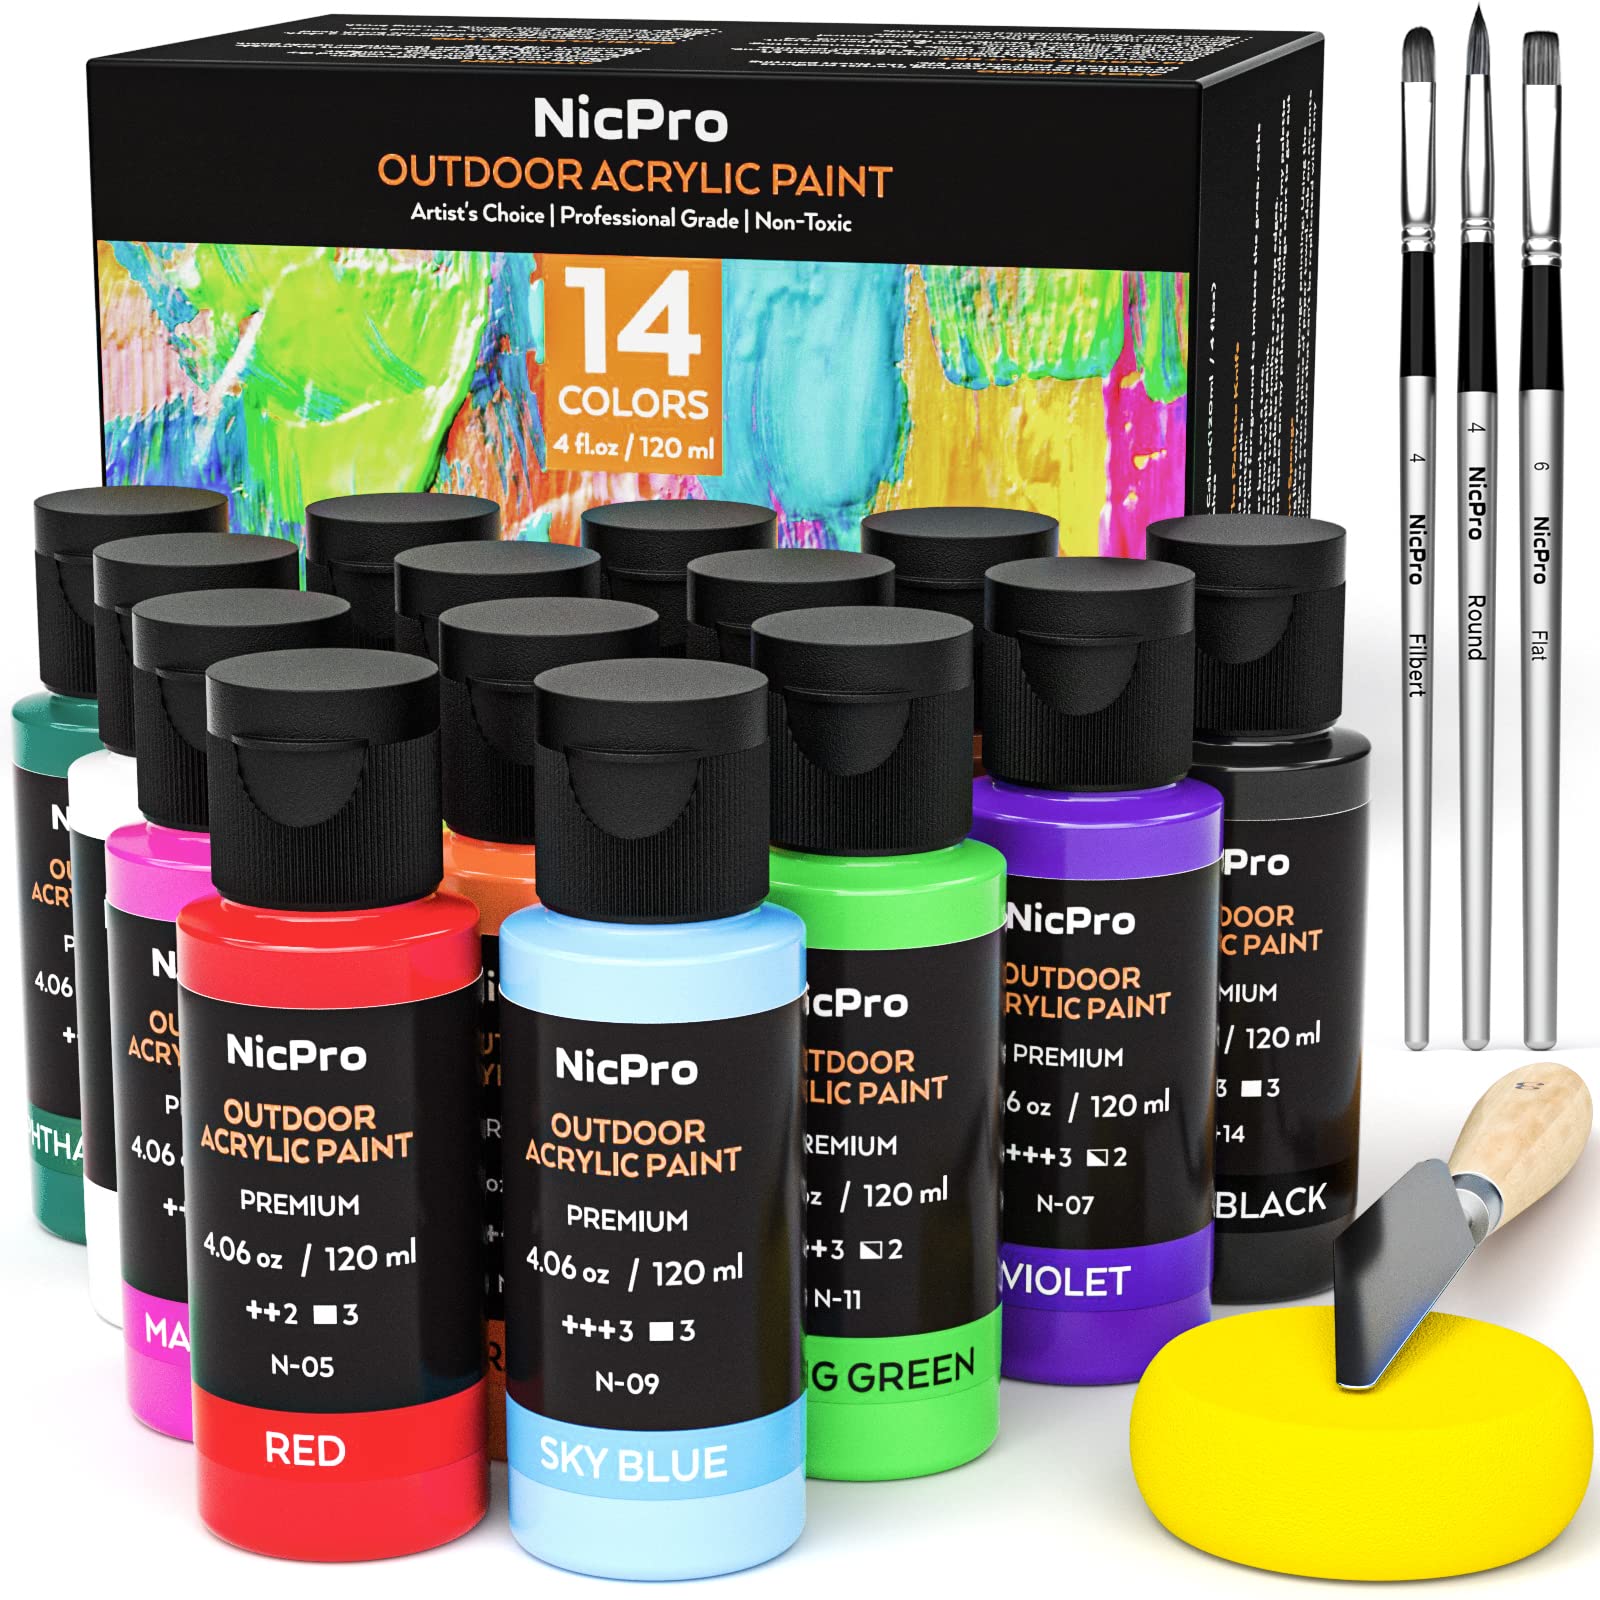 Nicpro 14 Colors 4.06 oz Outdoor Acrylic Paint Bulk with Brush and Spo